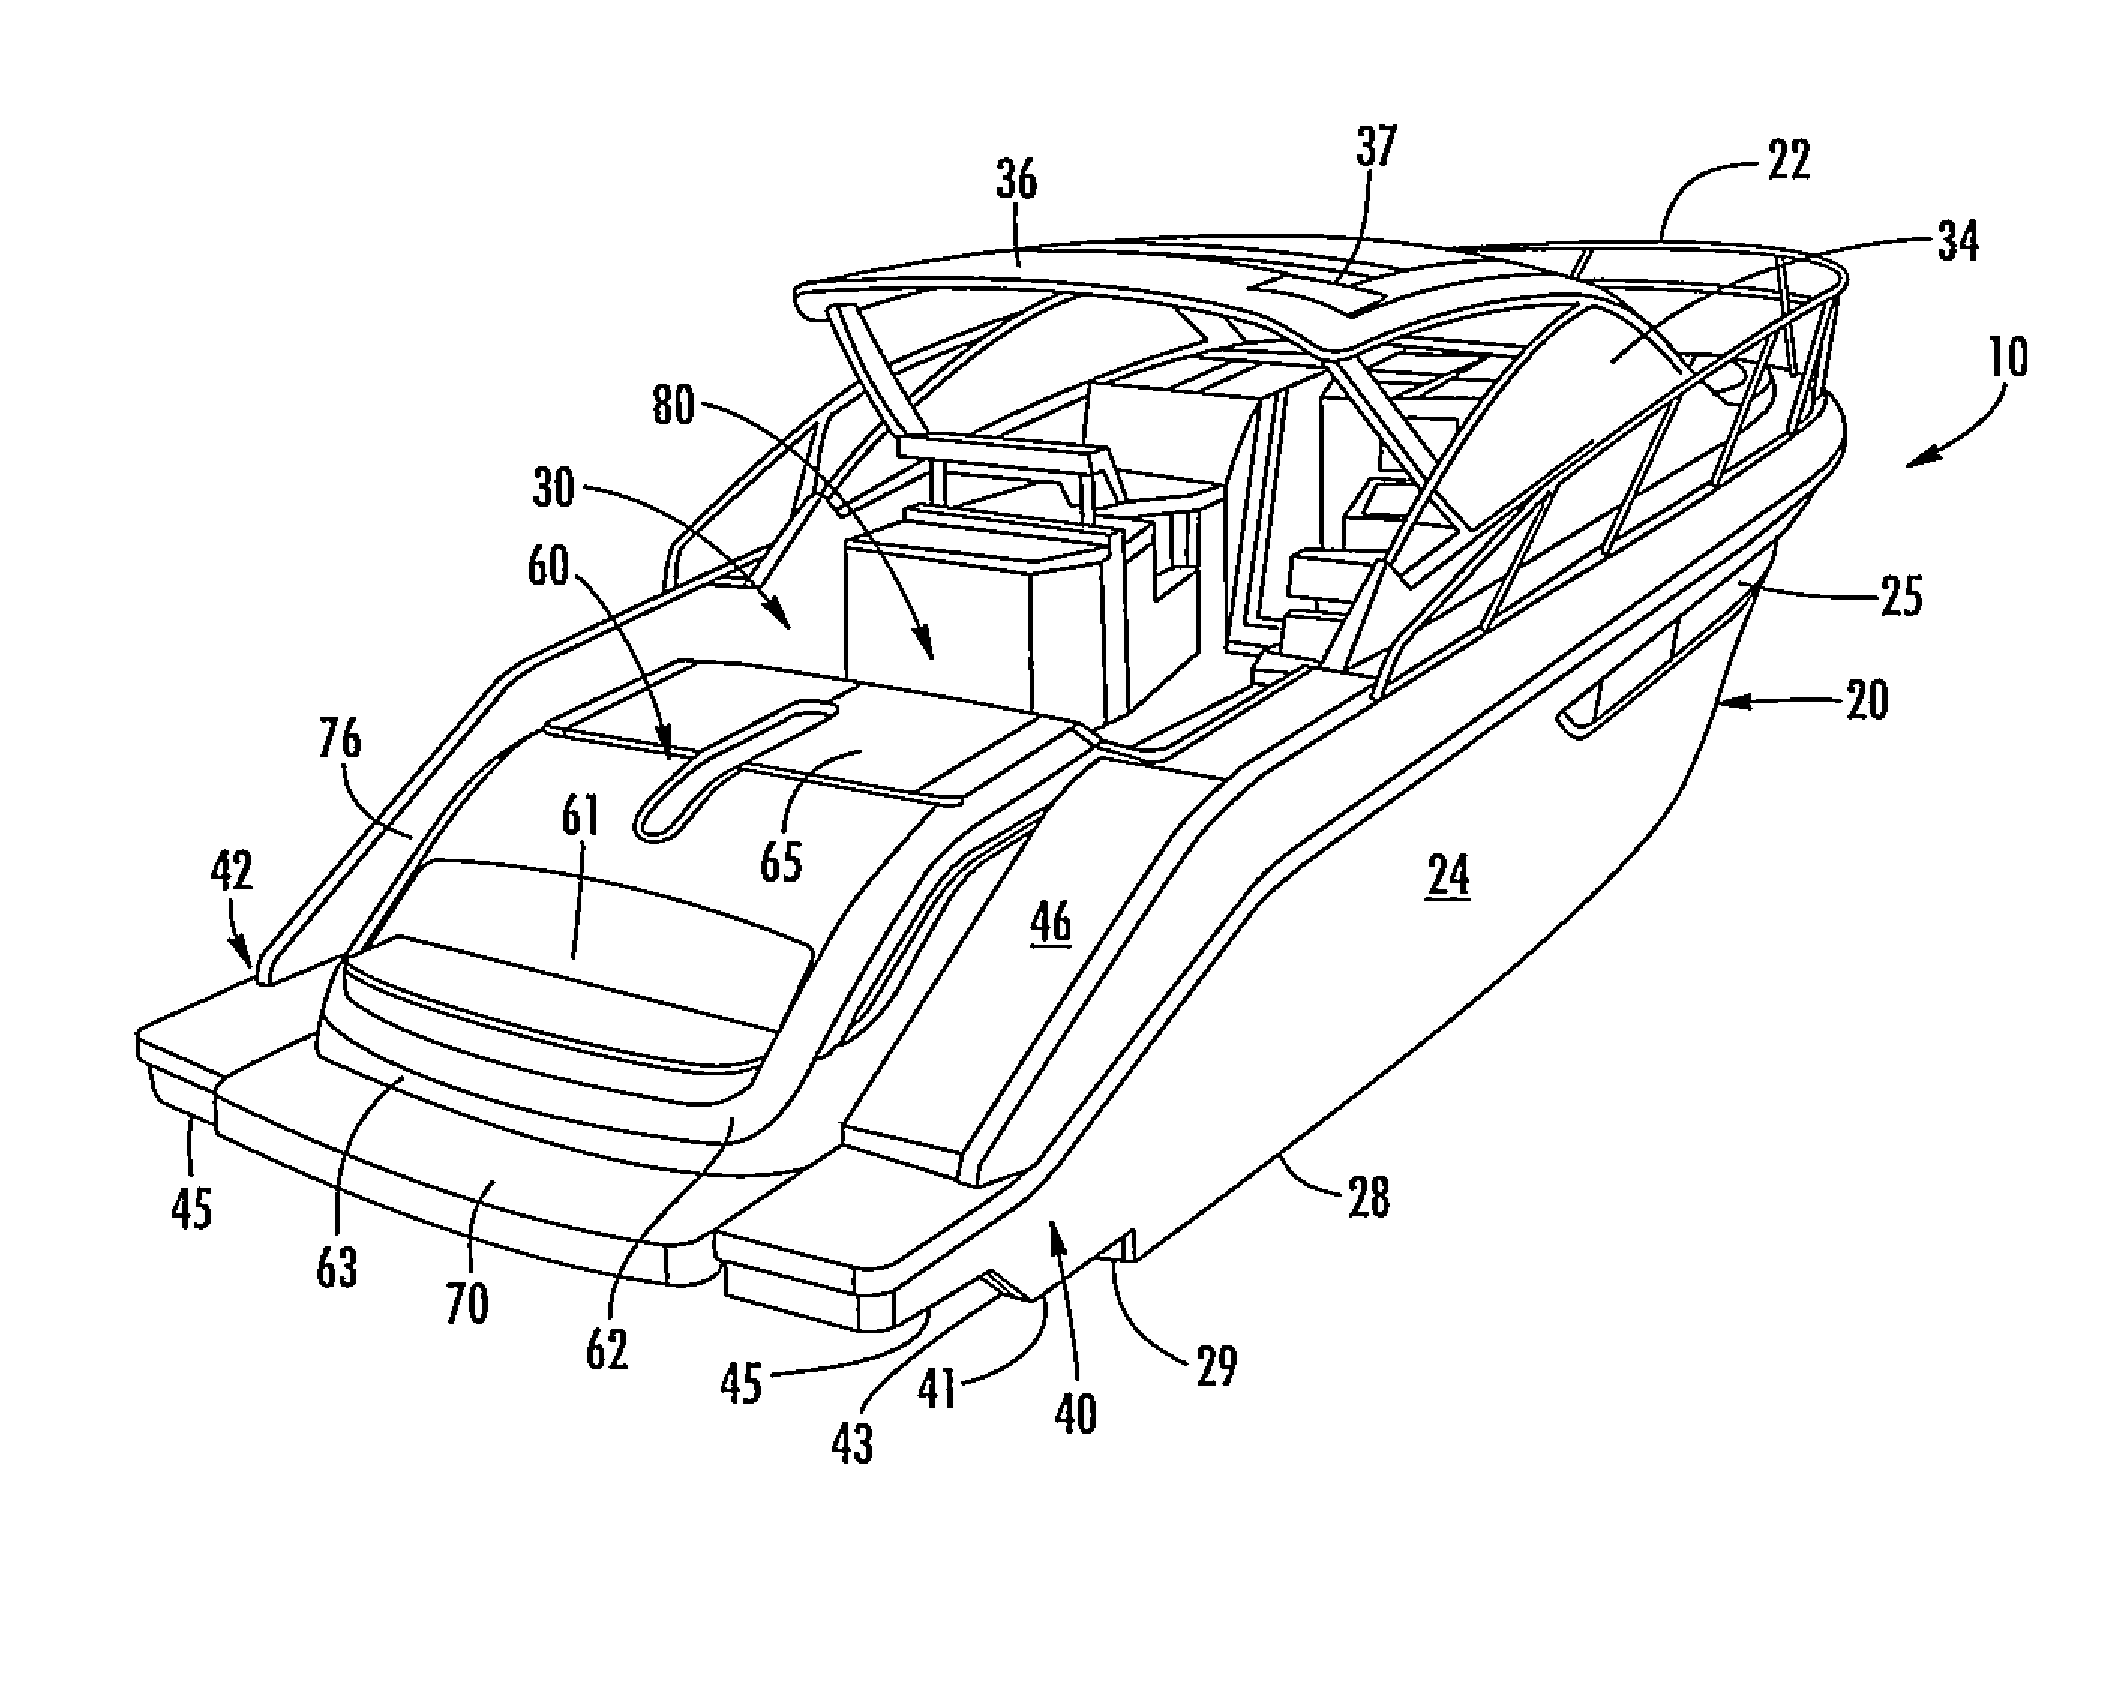 Vessel having extensions for supporting swim platform and concealing outboard engines